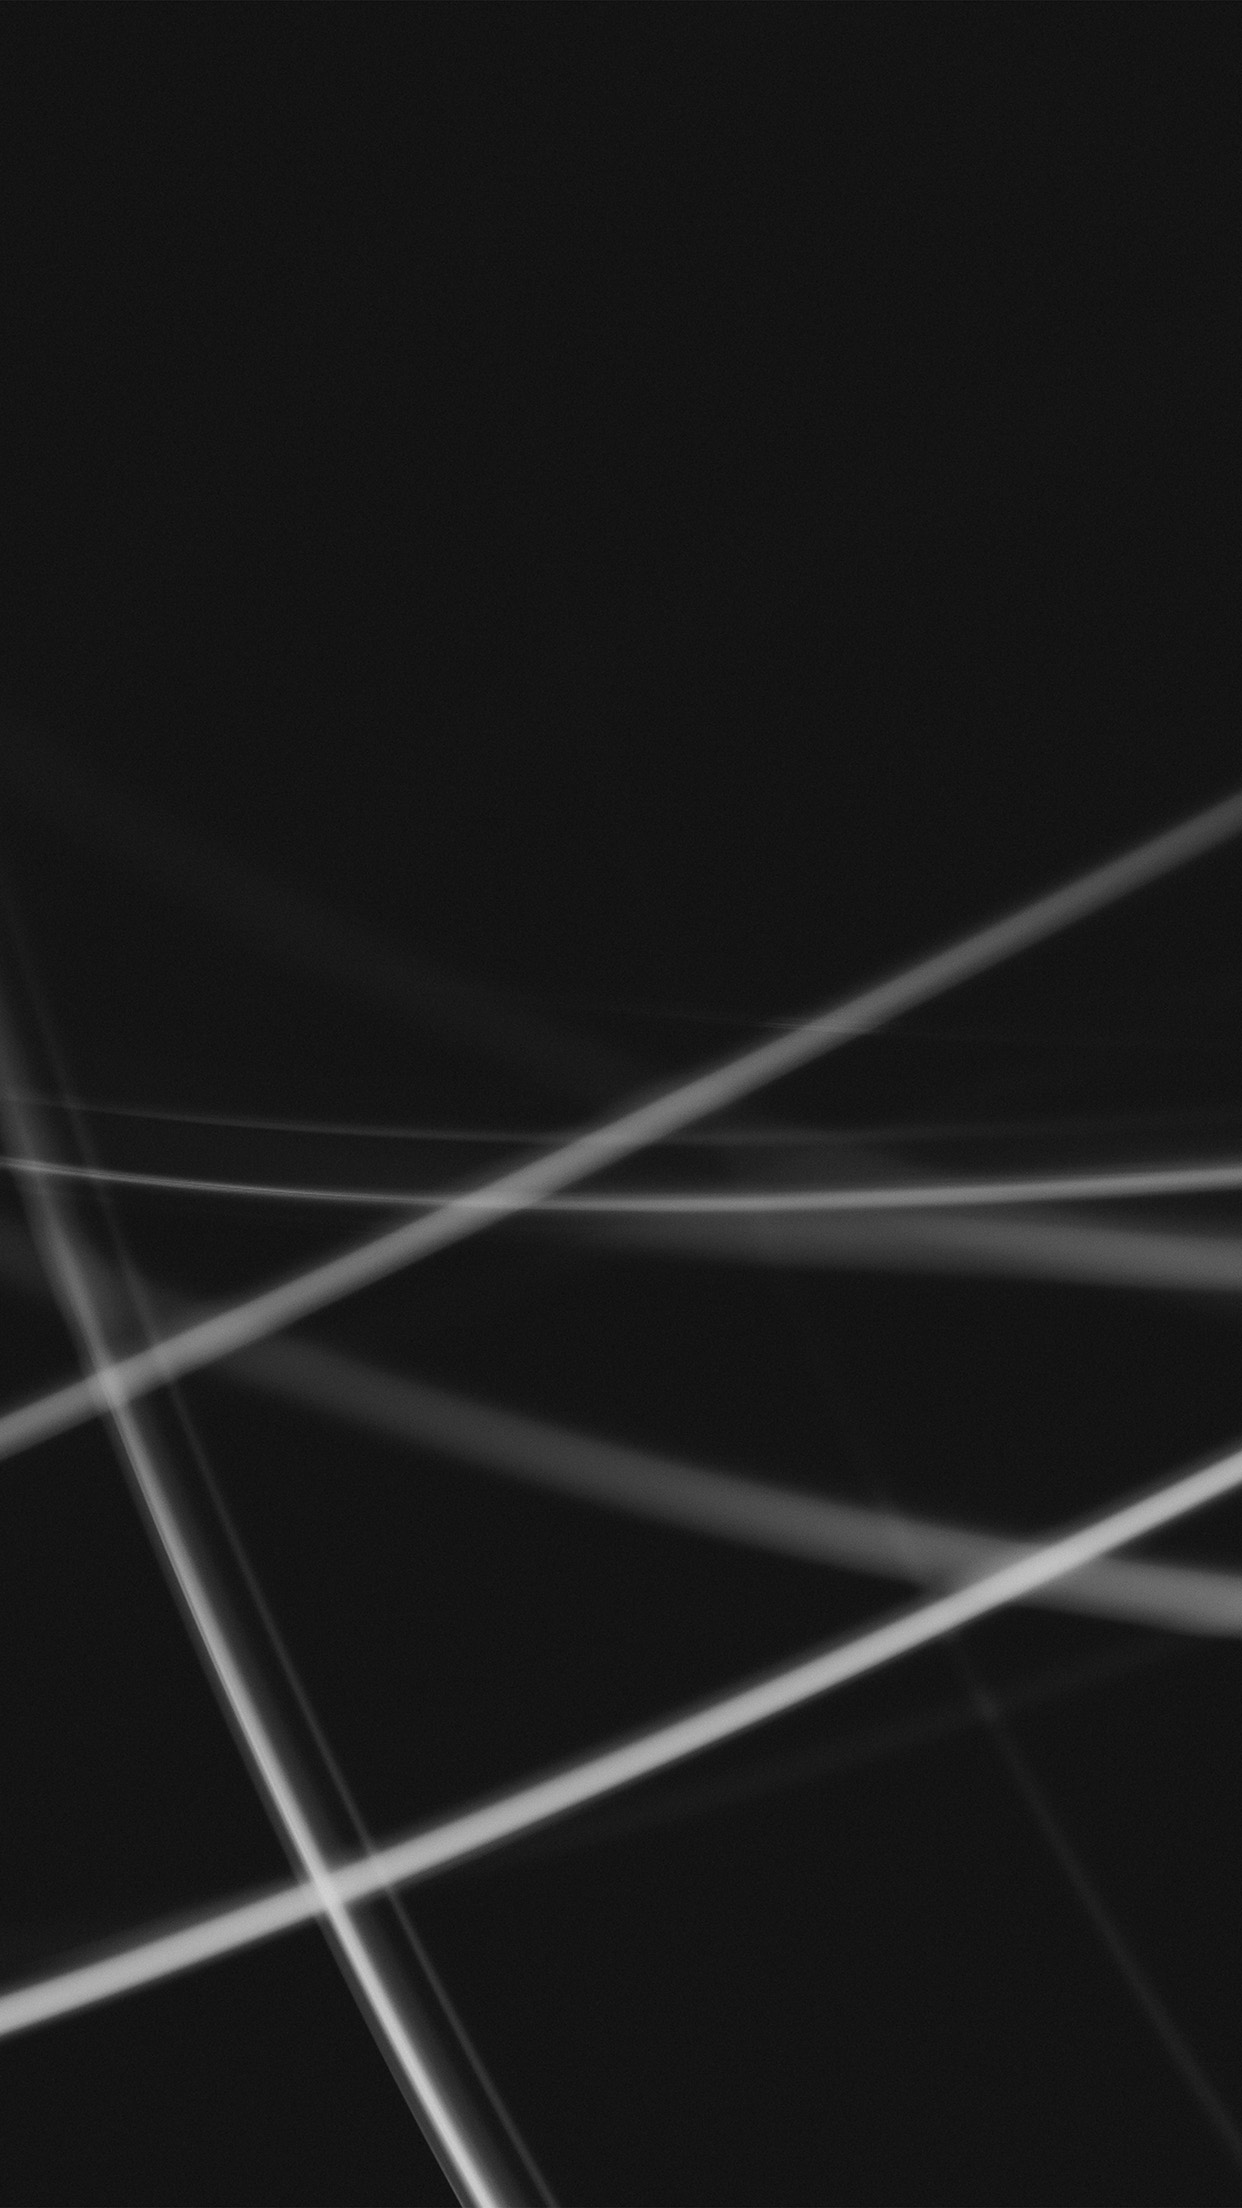 Dark Line Abstract Pattern Bw Android wallpaper